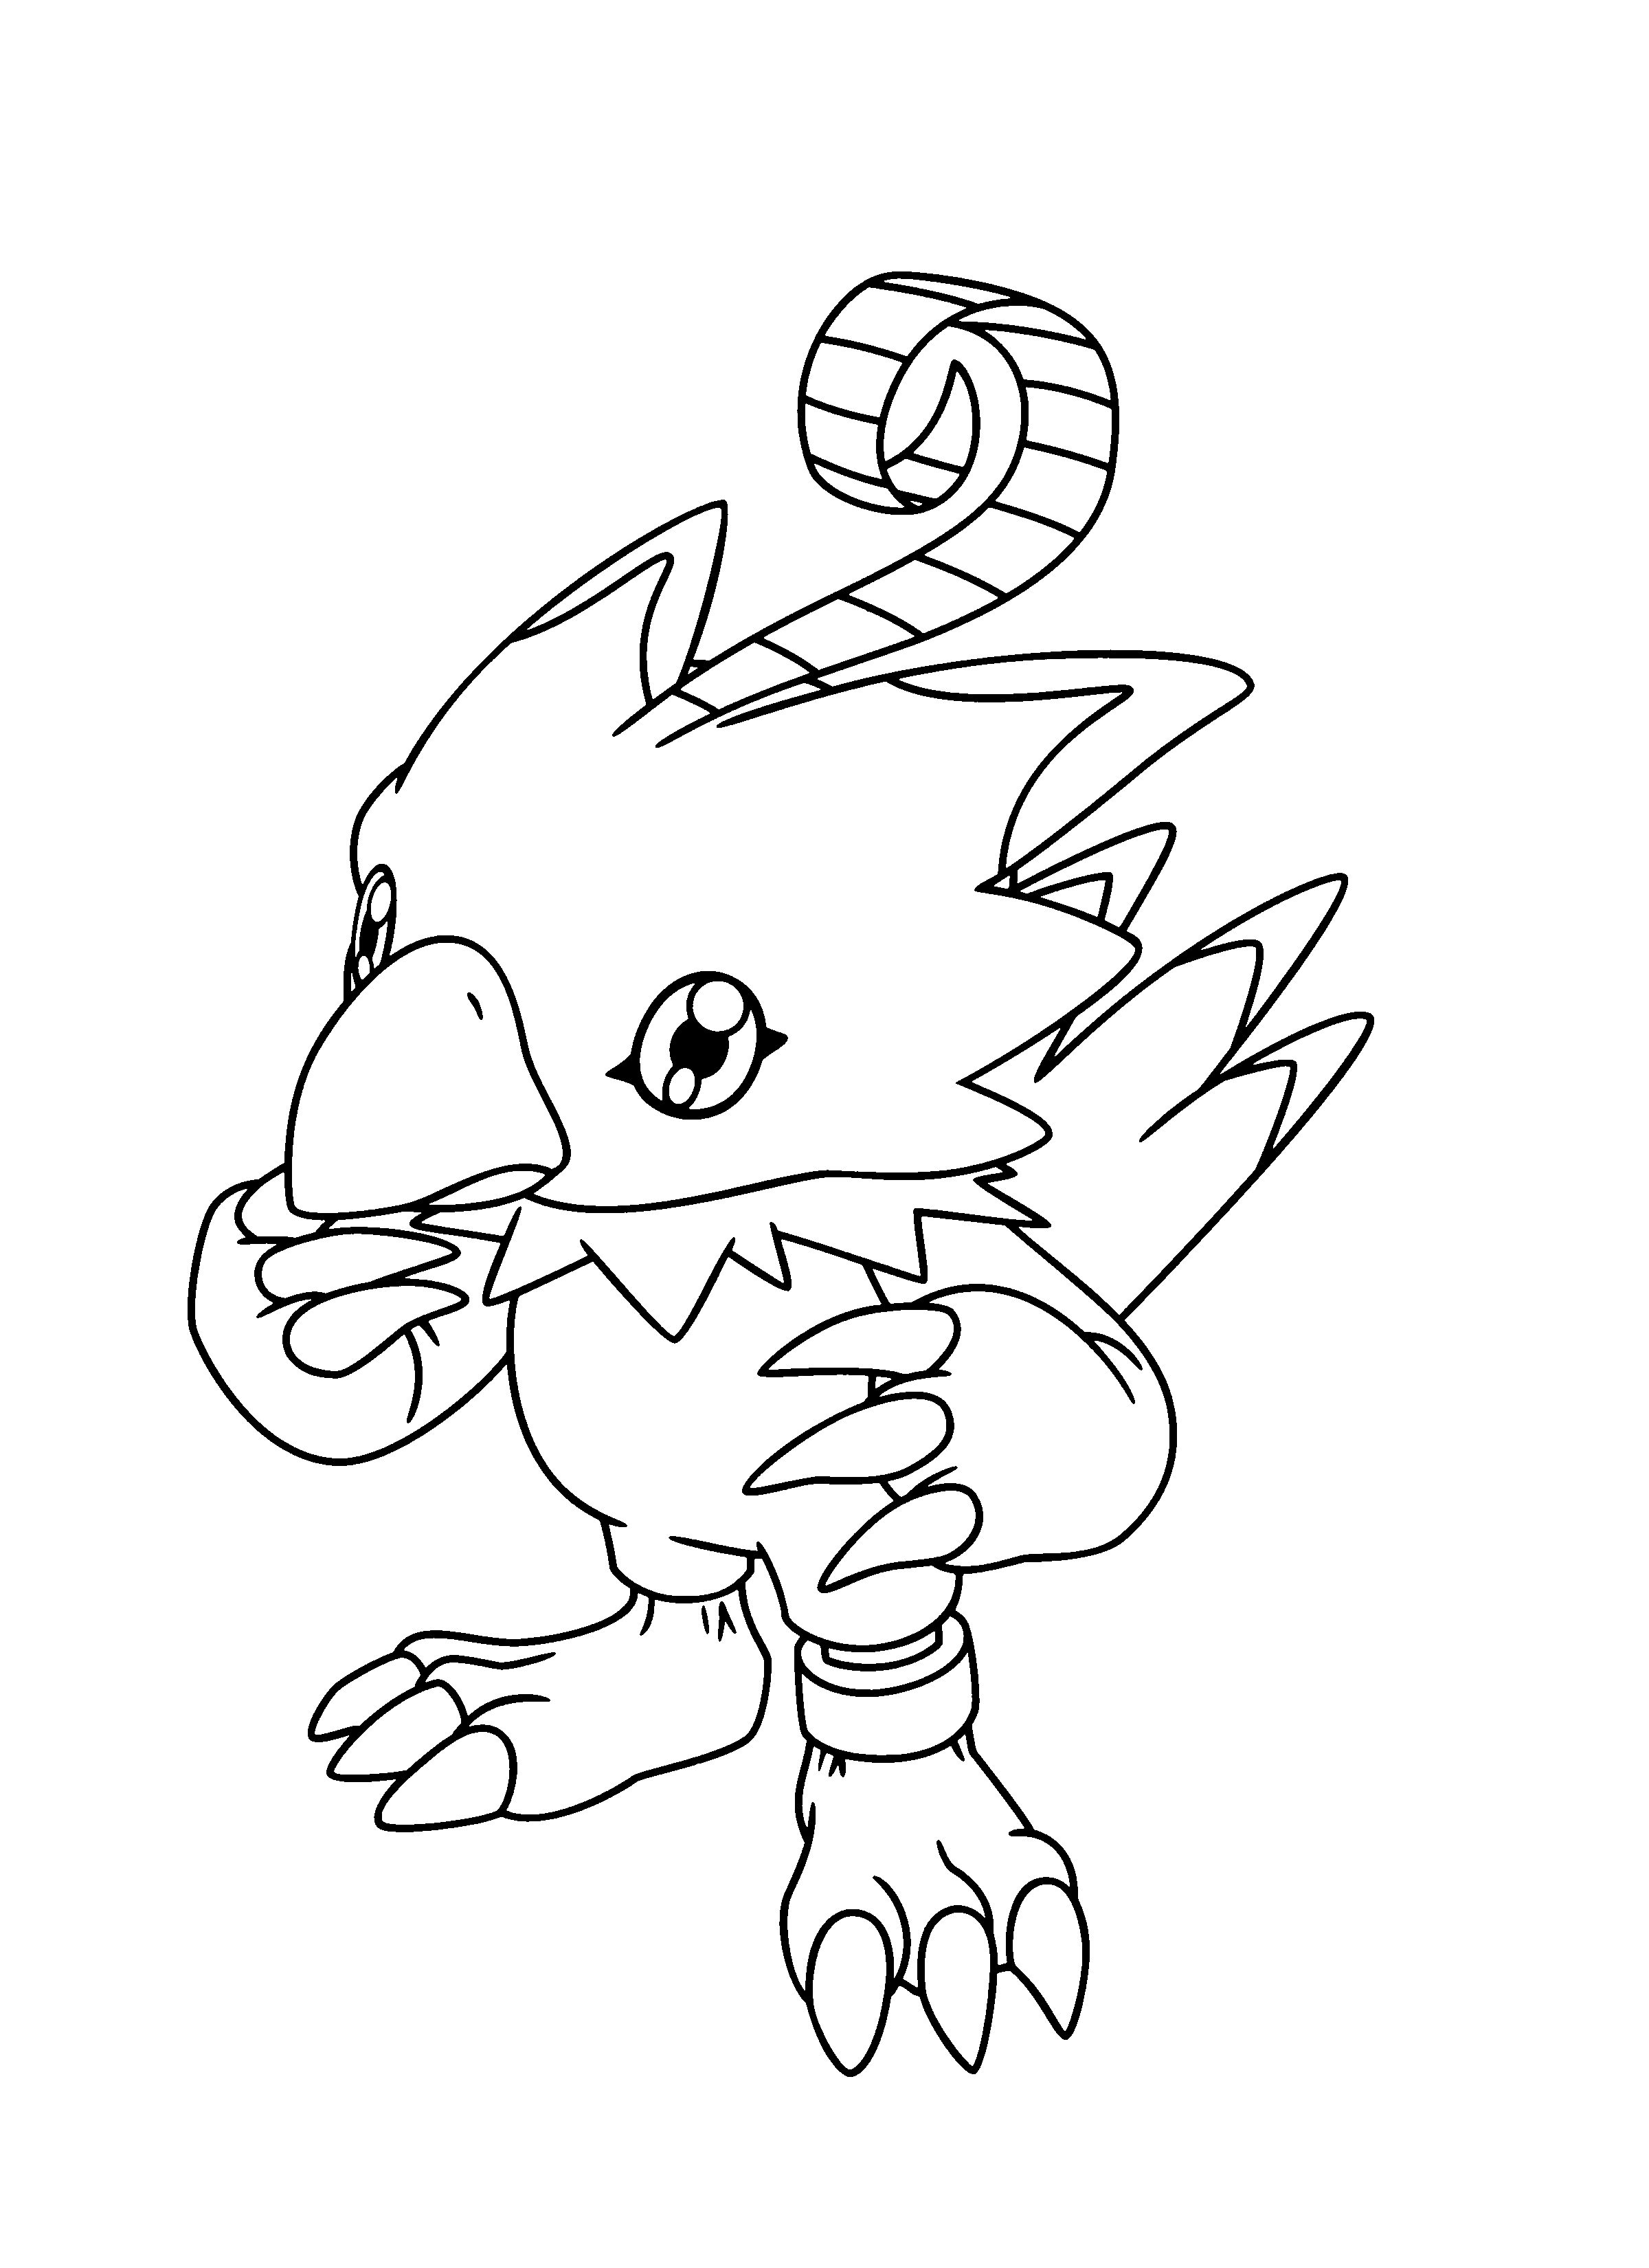 Digimon Coloring Page - Coloring Home